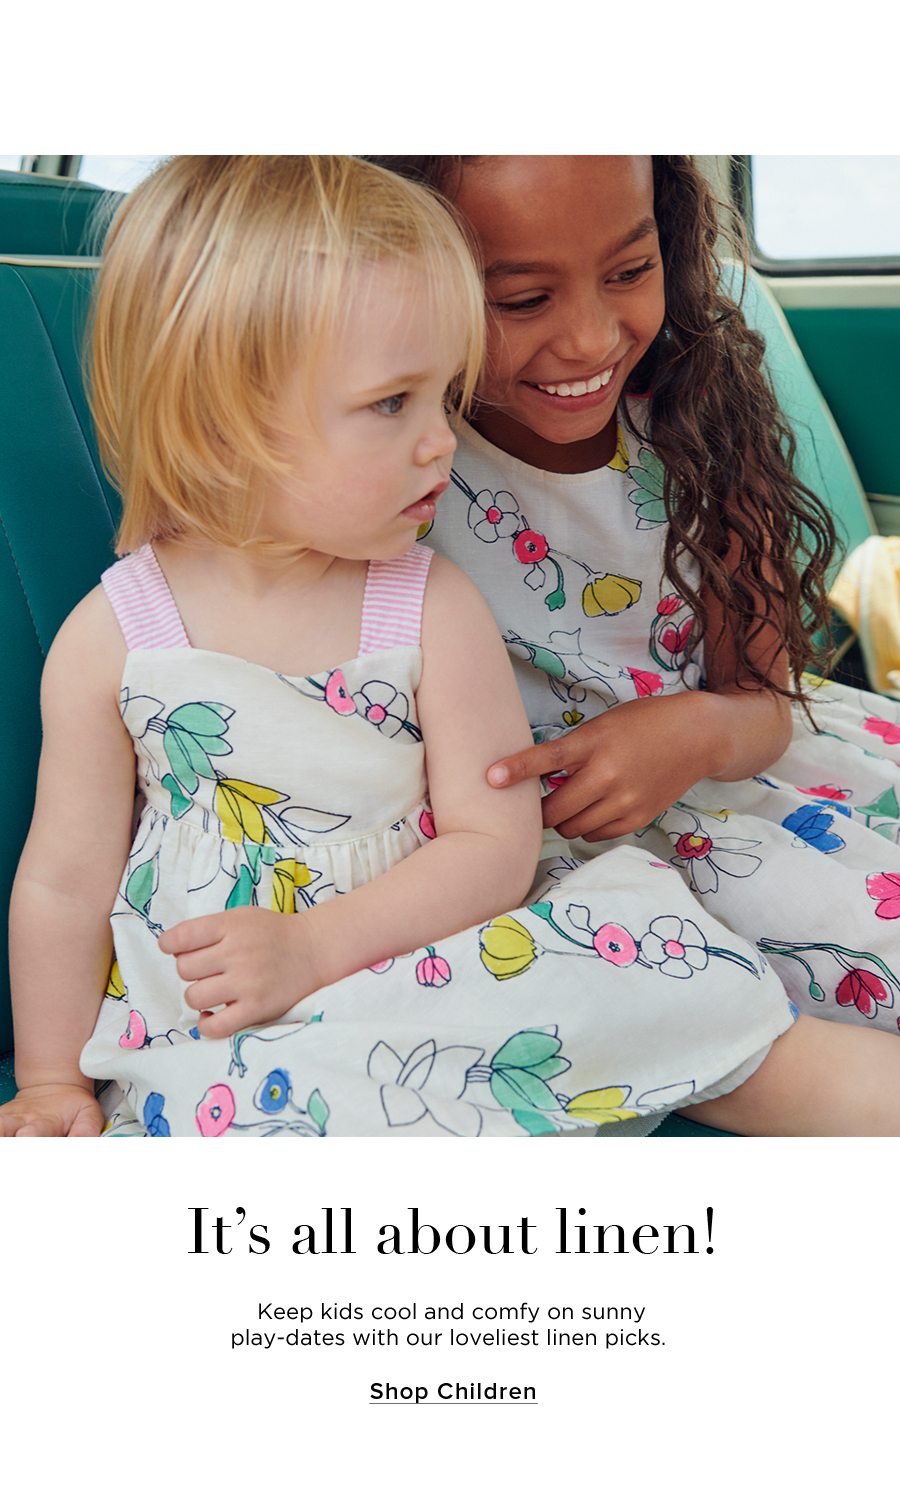 It’s All About Linen! Keep kids cool and comfy on sunny play-dates with our loveliest linen picks. Shop Children